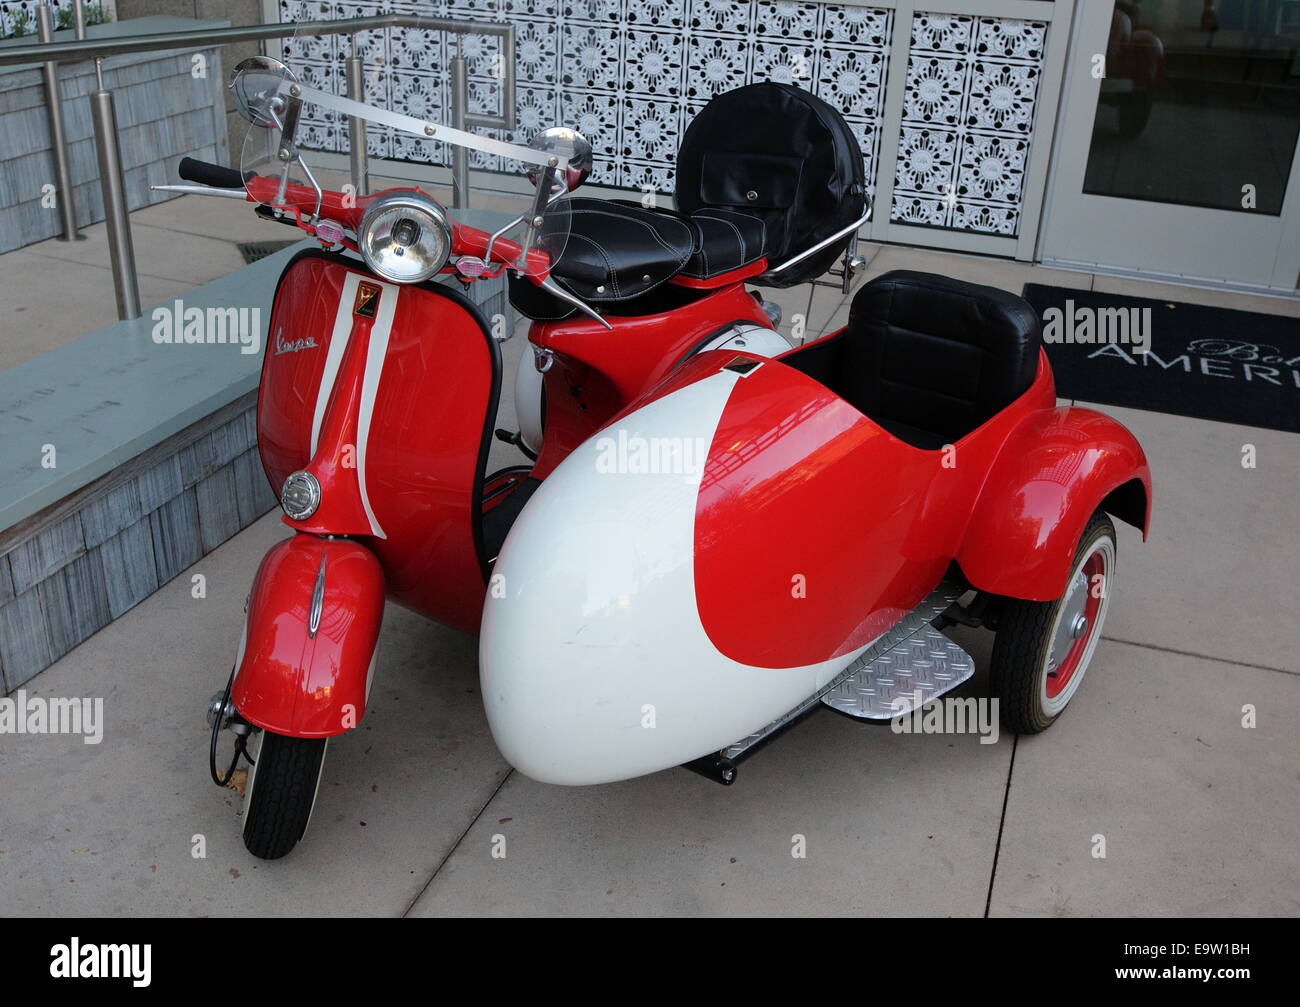 Vespa moped with sidecar in San Diego, California, USA. Stock Photo